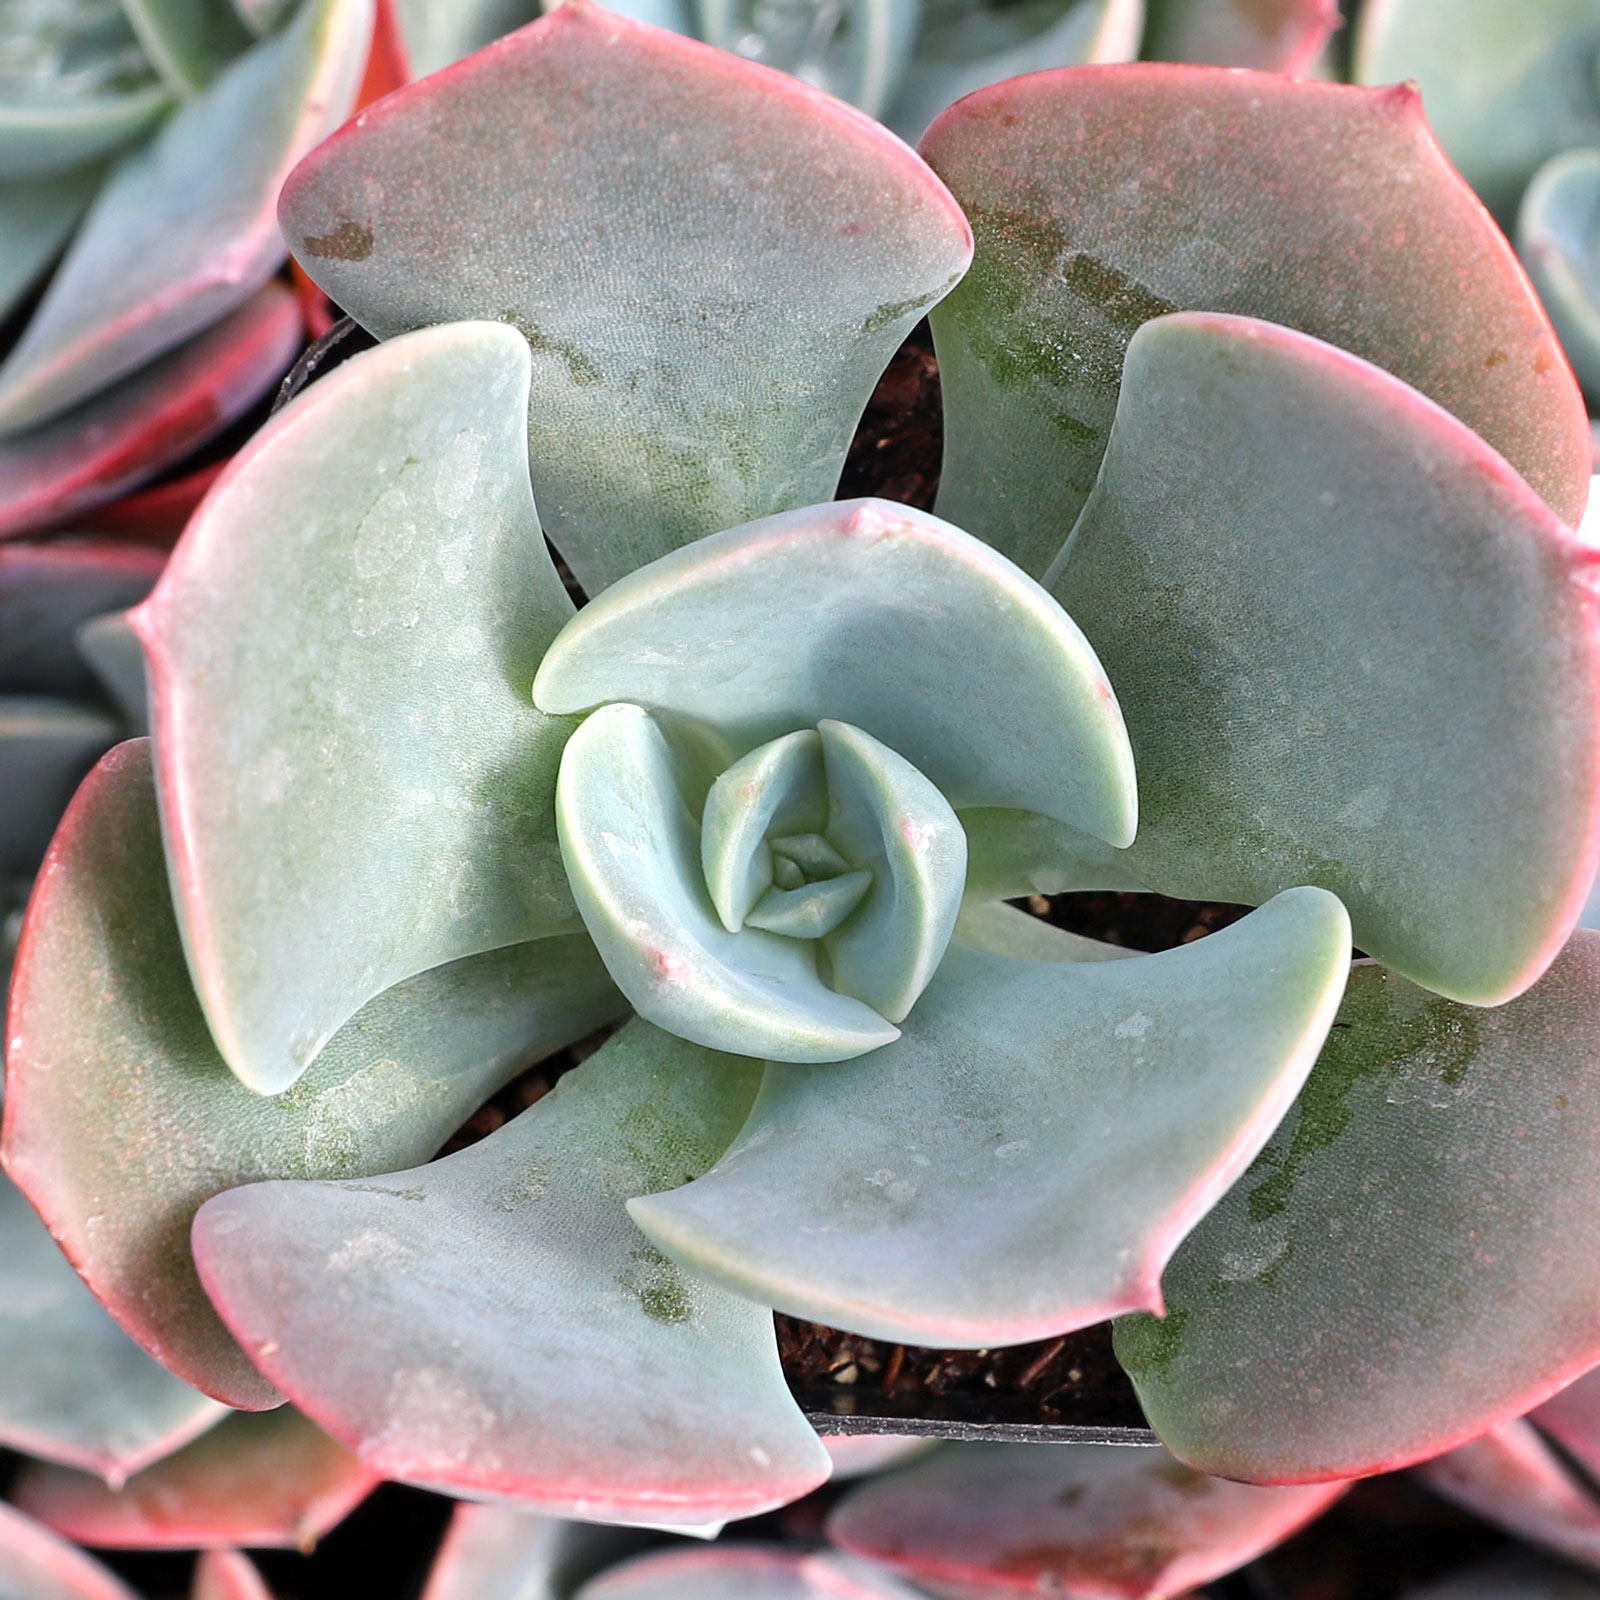 I live in zone 10.  Can the Echeveria plants be planted outside in the sun?